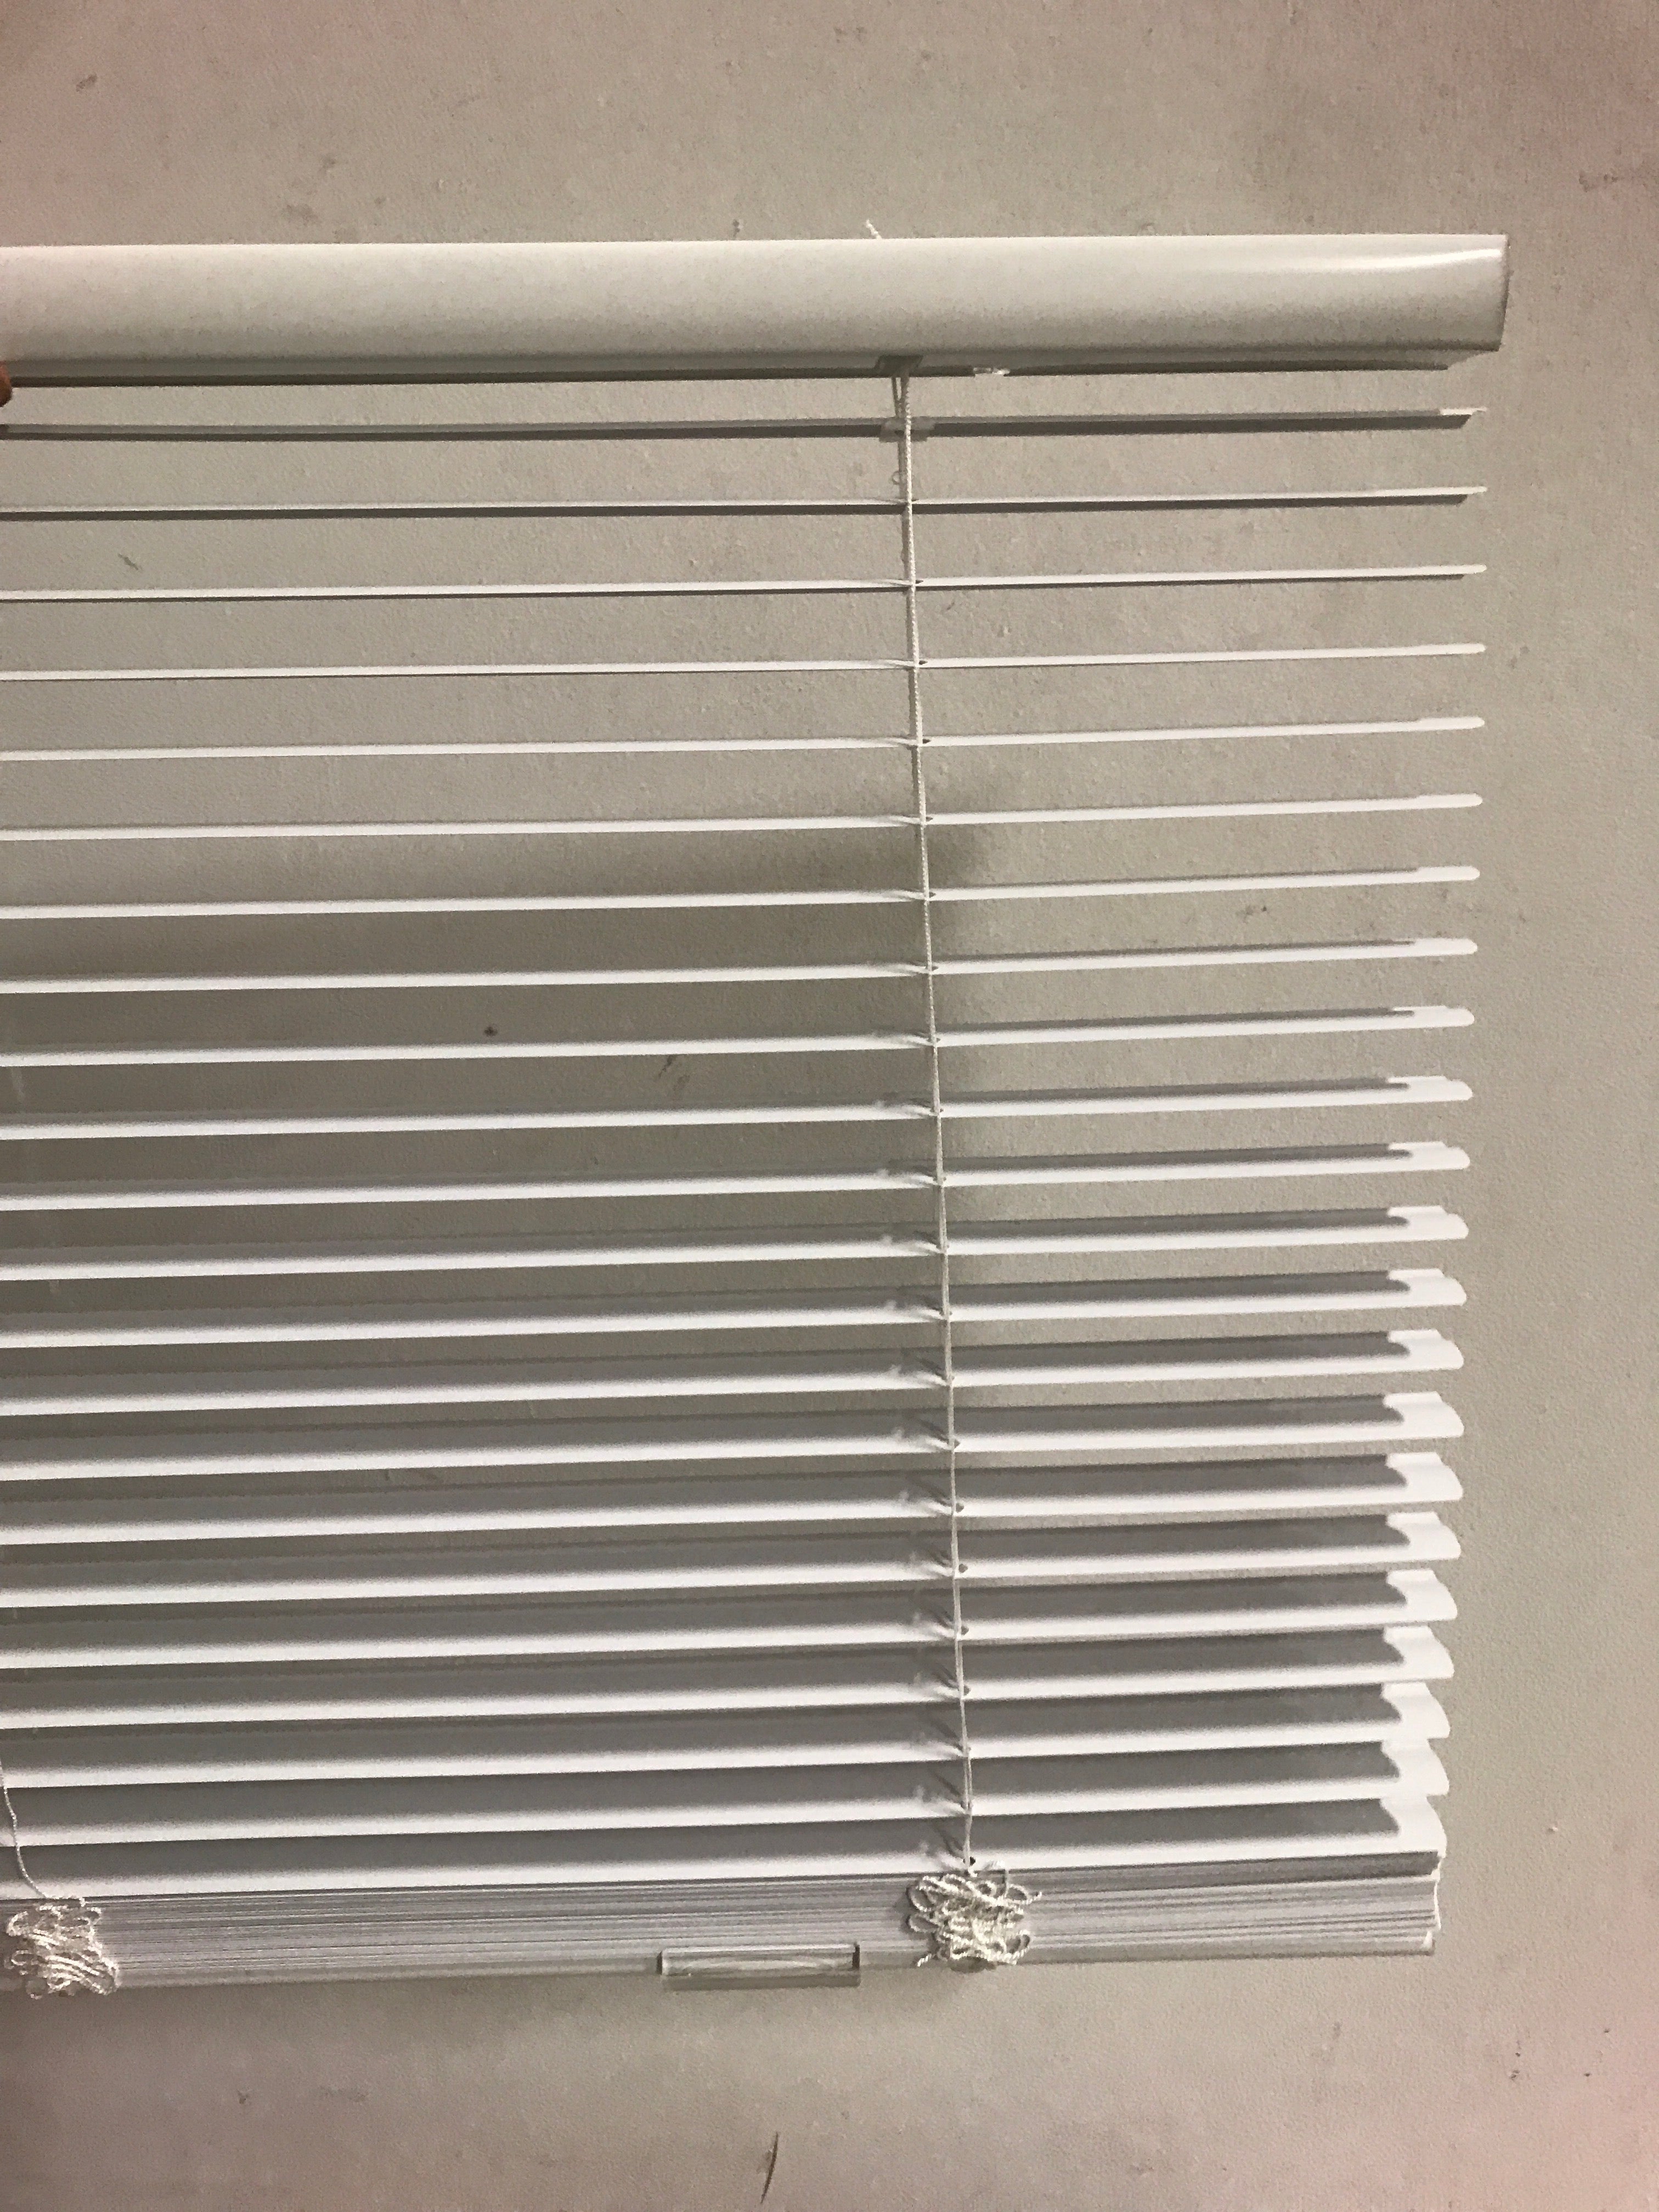 Unbranded 10793478353286 White Cordless Enhanced Room Darkening Vinyl Blinds with 1 in. Slat - 34 in. W x 48 in. L (Actual 33.5 in. W x 48 in. L)